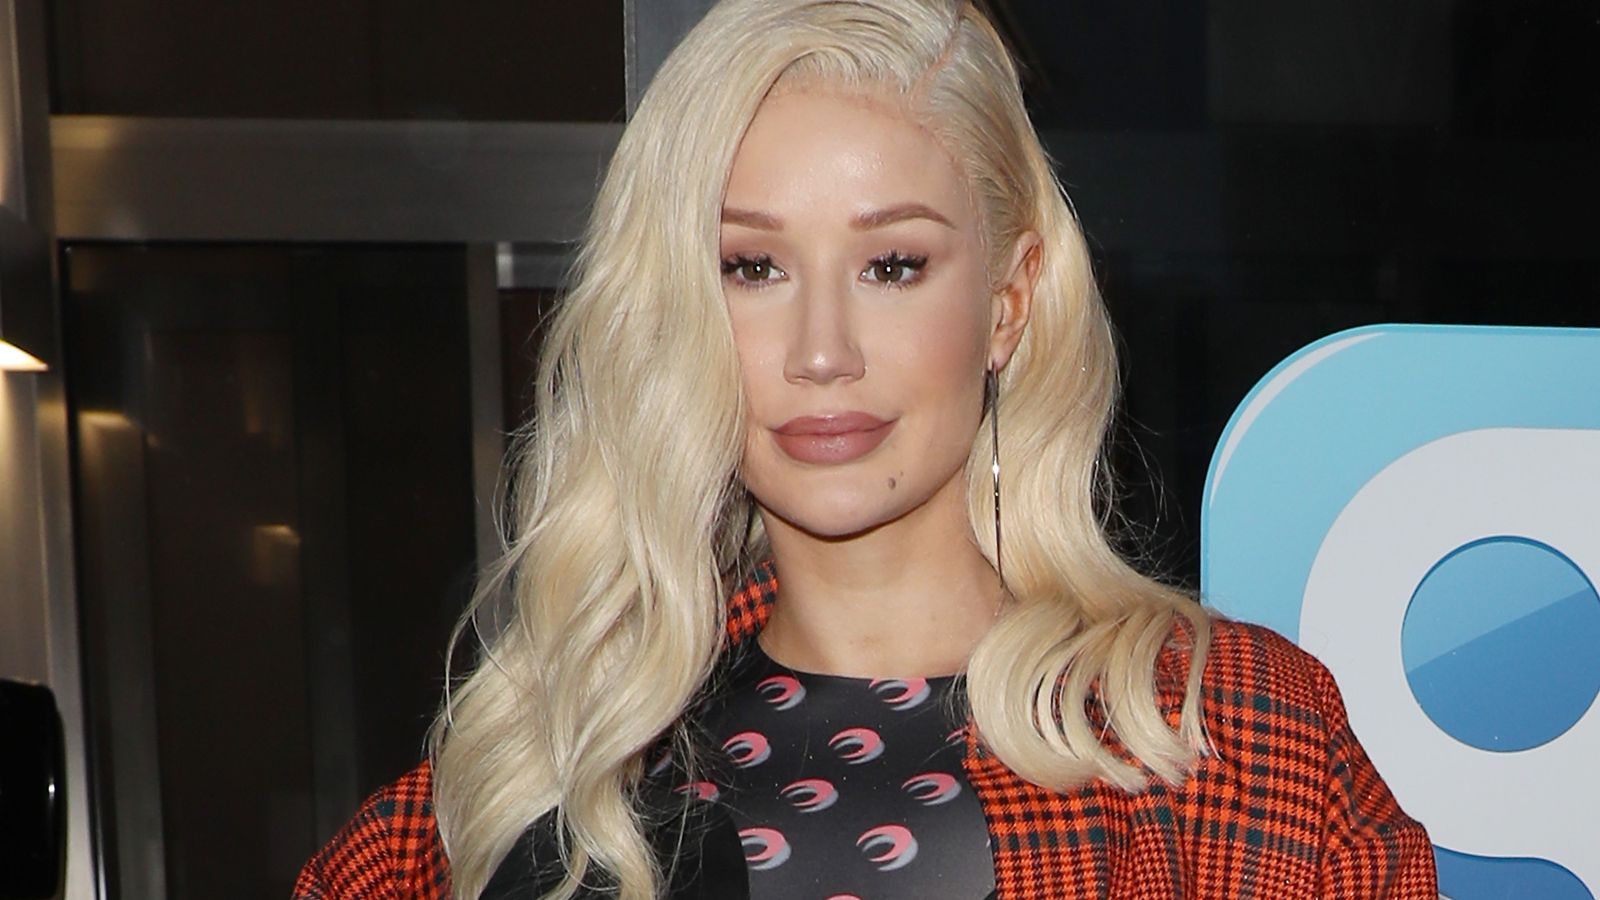 Iggy Azalea: Rapper reveals she has a son, but is keeping his life private  | Ents & Arts News | Sky News